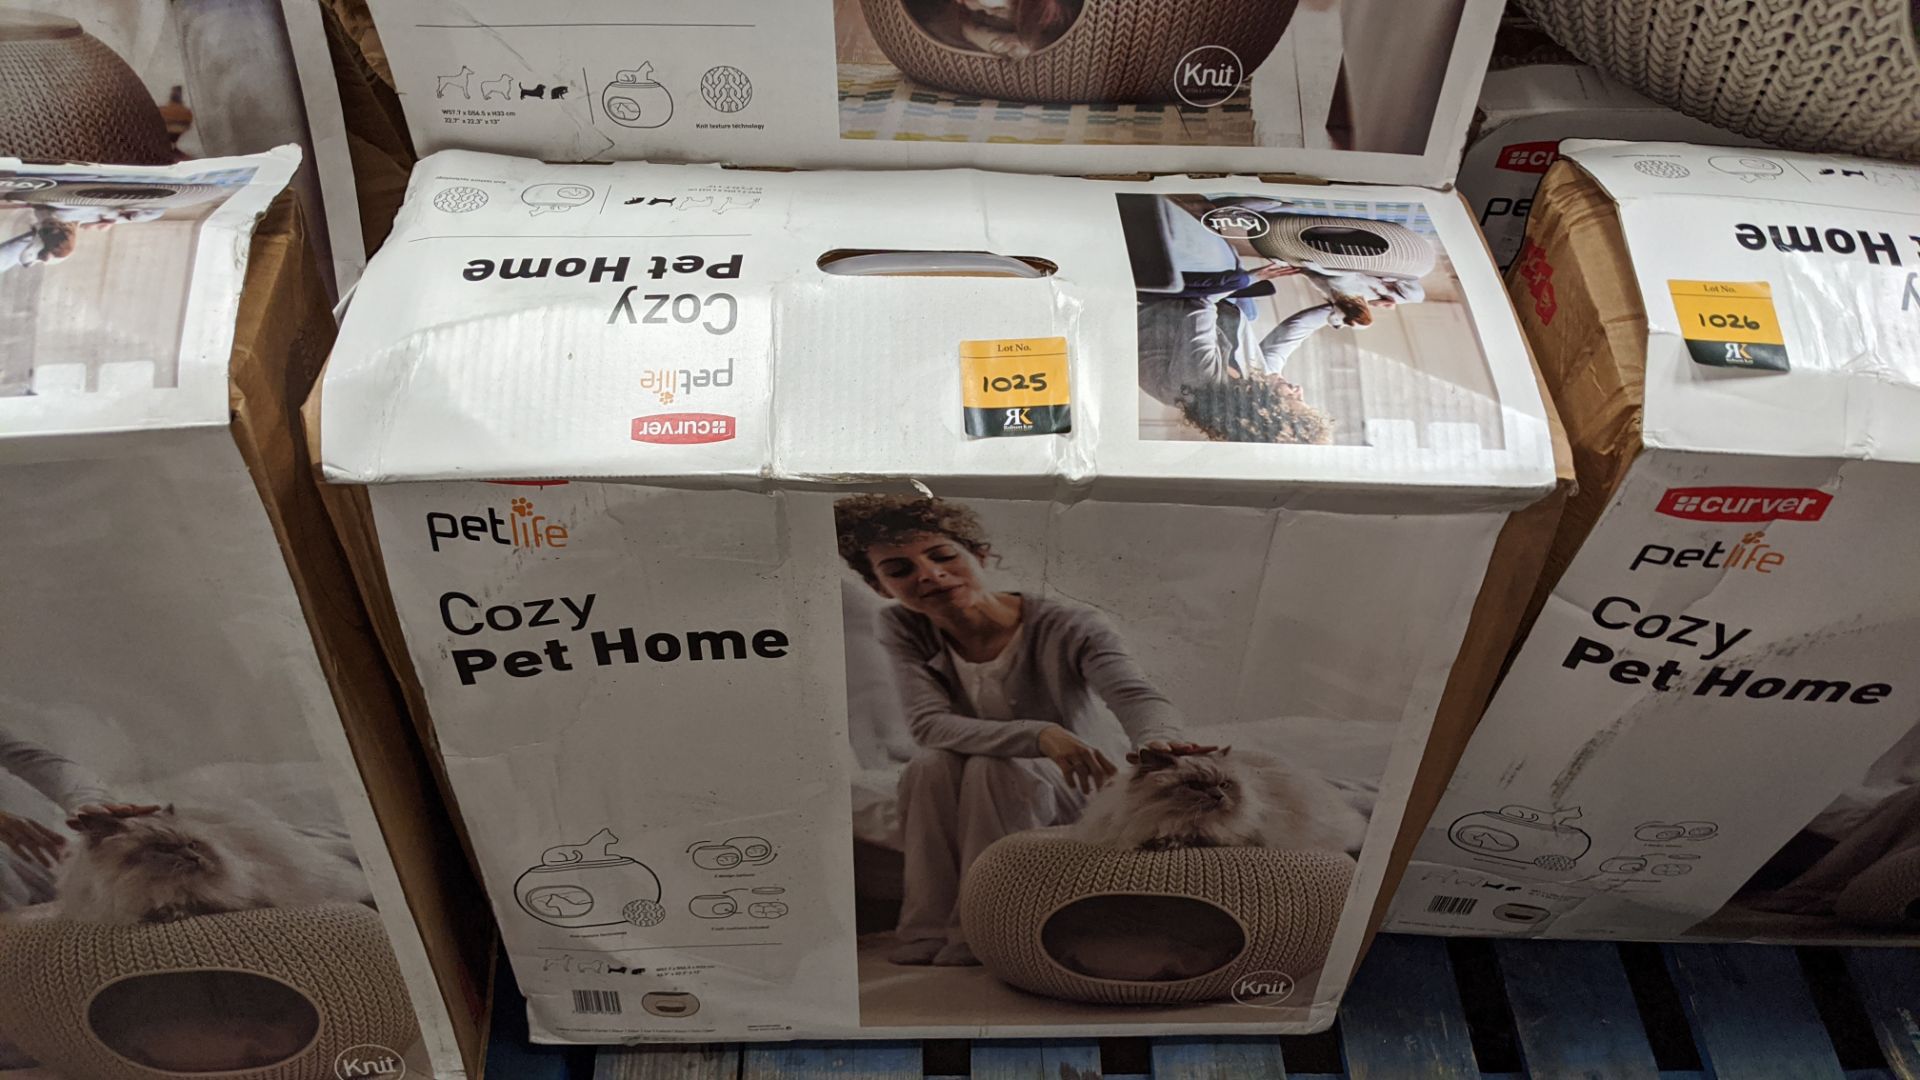 4 off Curver Petlife Cozy pet homes, approx. 57.7 x 56.5 x 33cm - Image 3 of 4